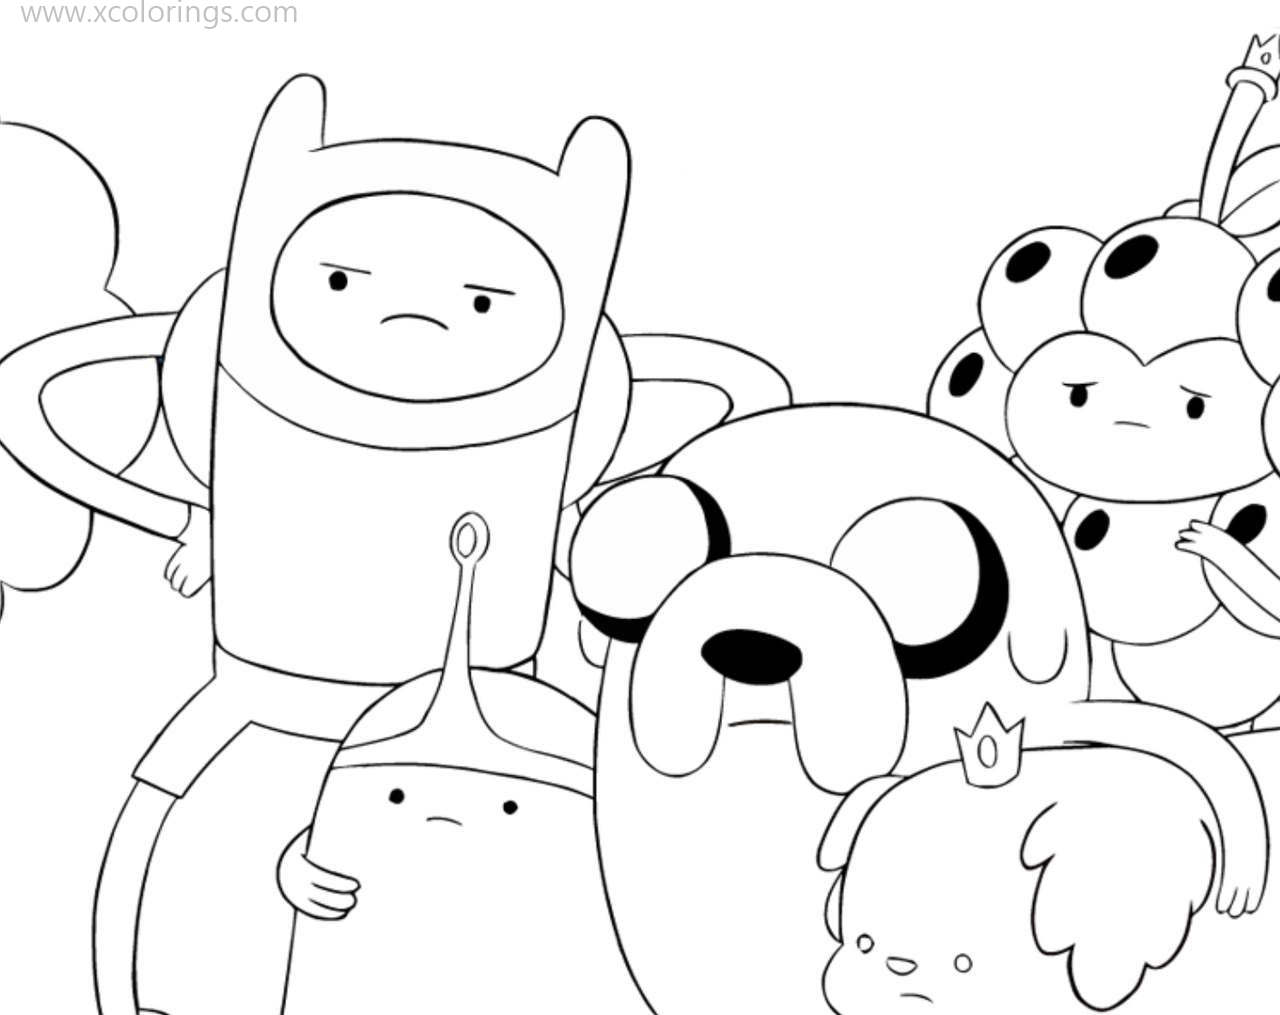 Free Adventure Time Coloring Pages Jake and Dogs printable